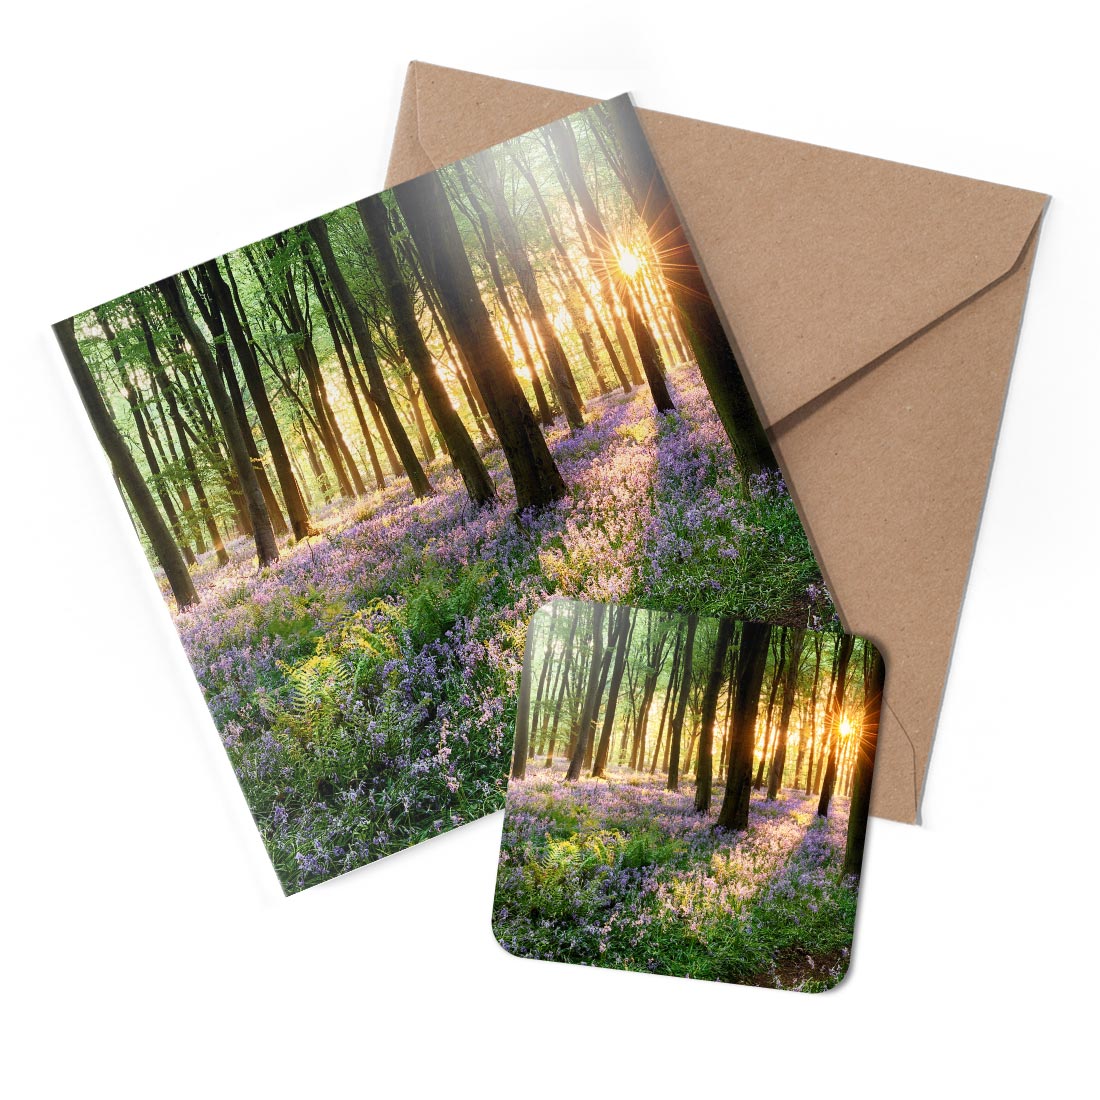 1 x Greeting Card & Coaster Set - Bluebell Forest Flowers Woods #50346